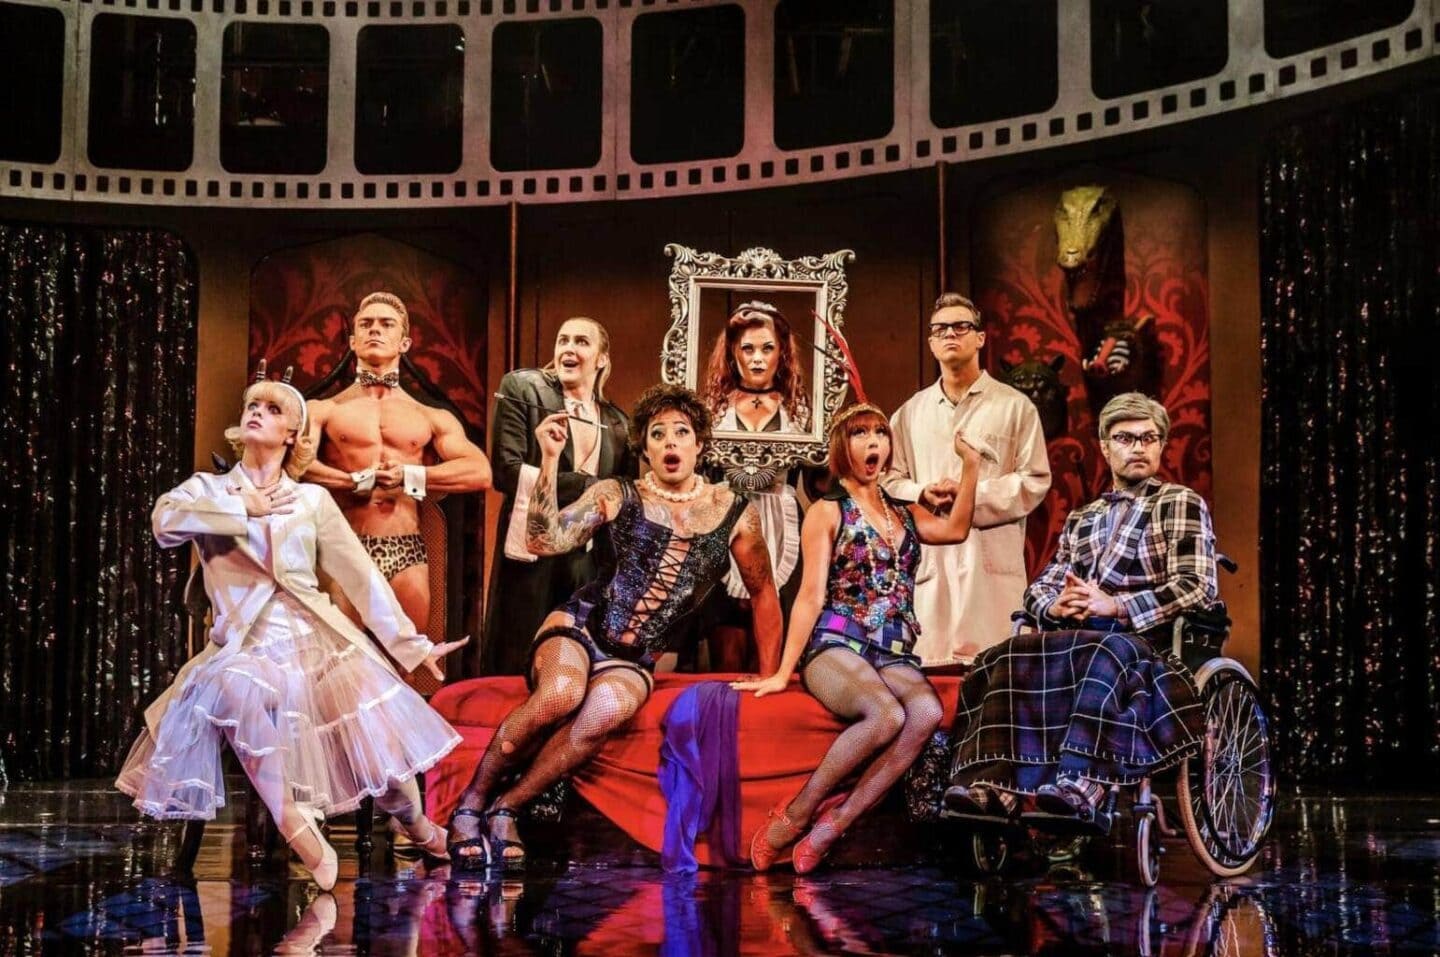 Review of Rocky Horror Show